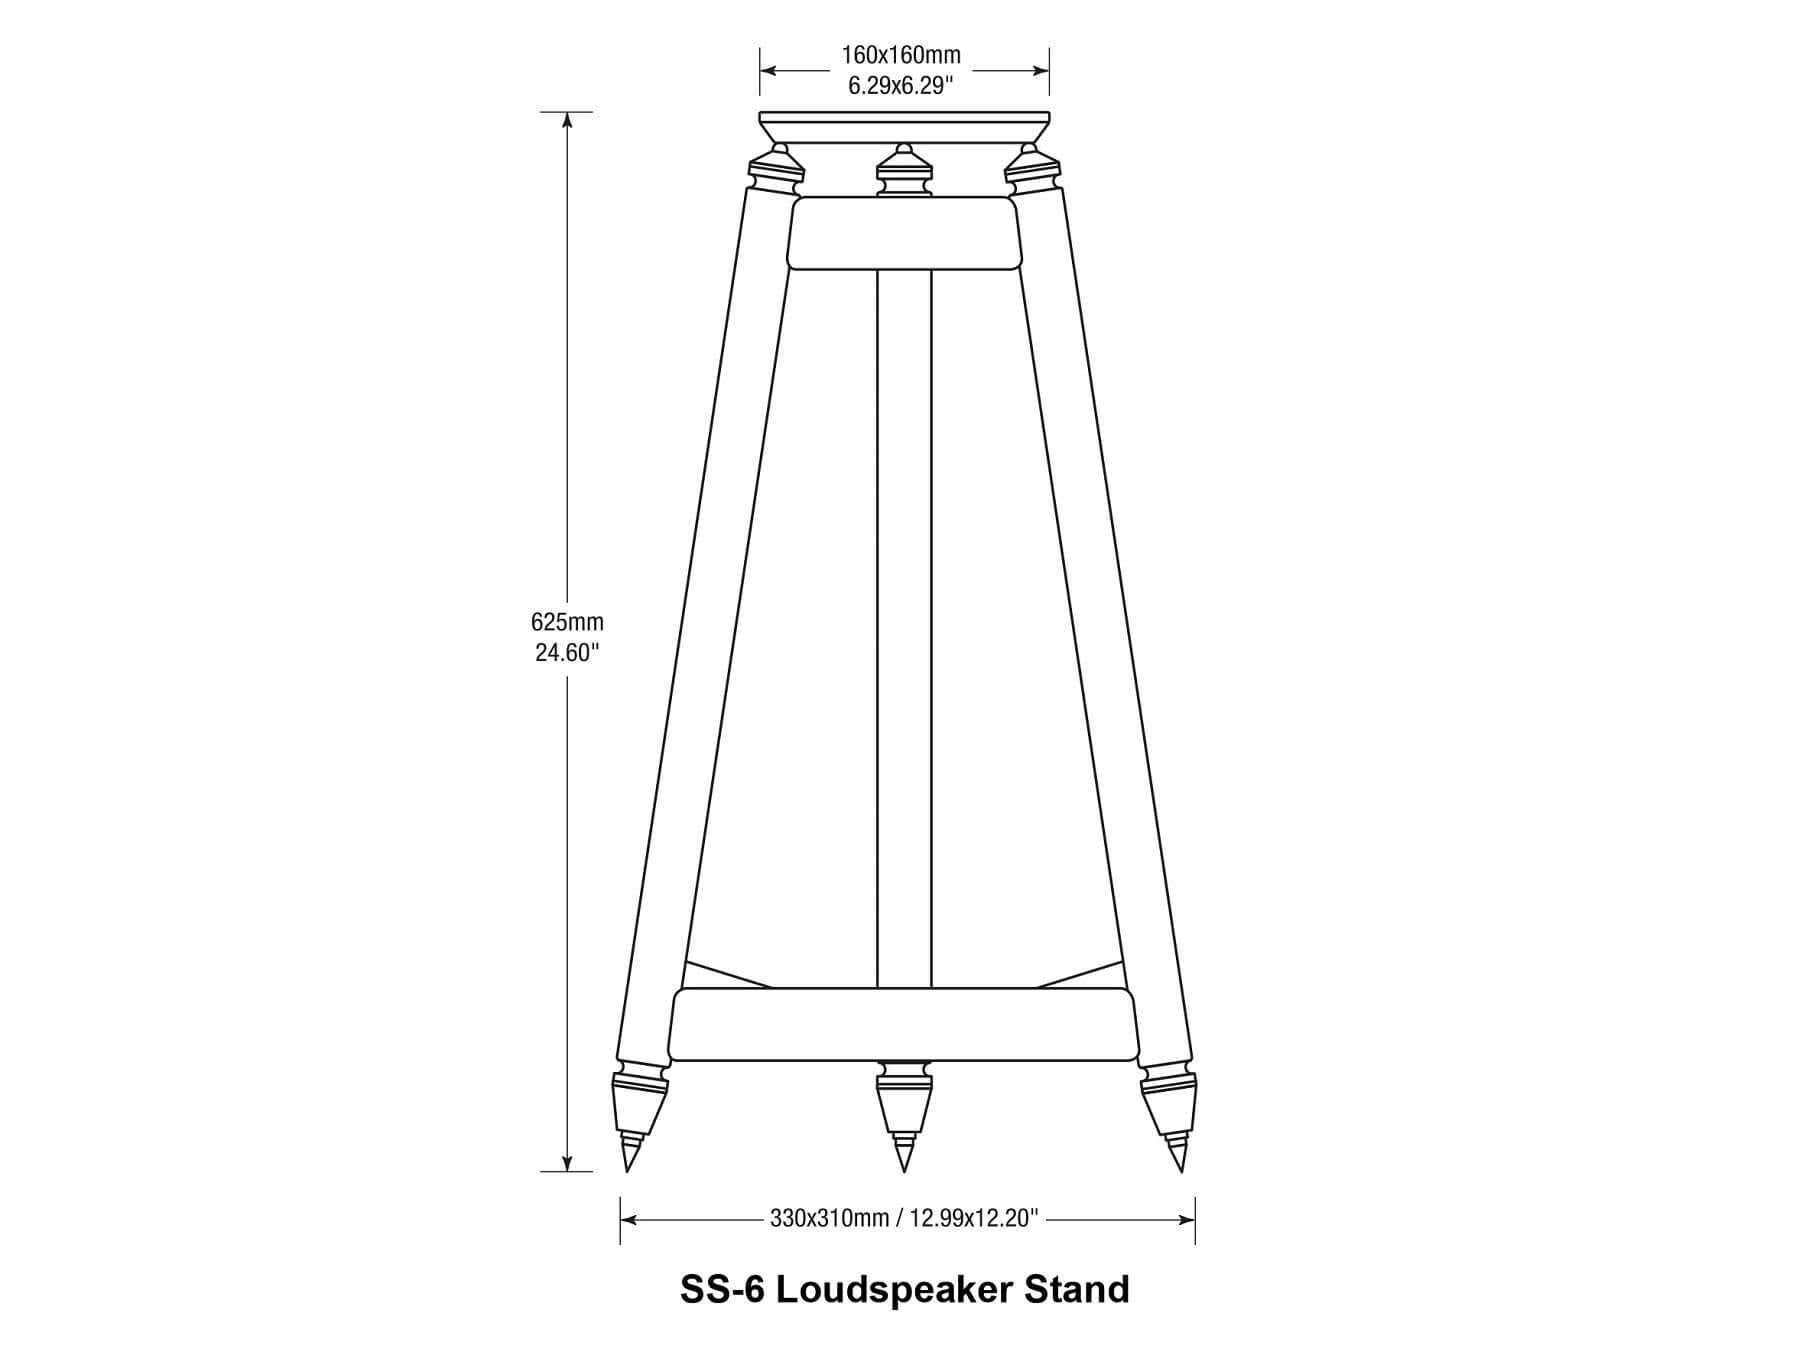 Solidsteel SS-6 - Dimensions